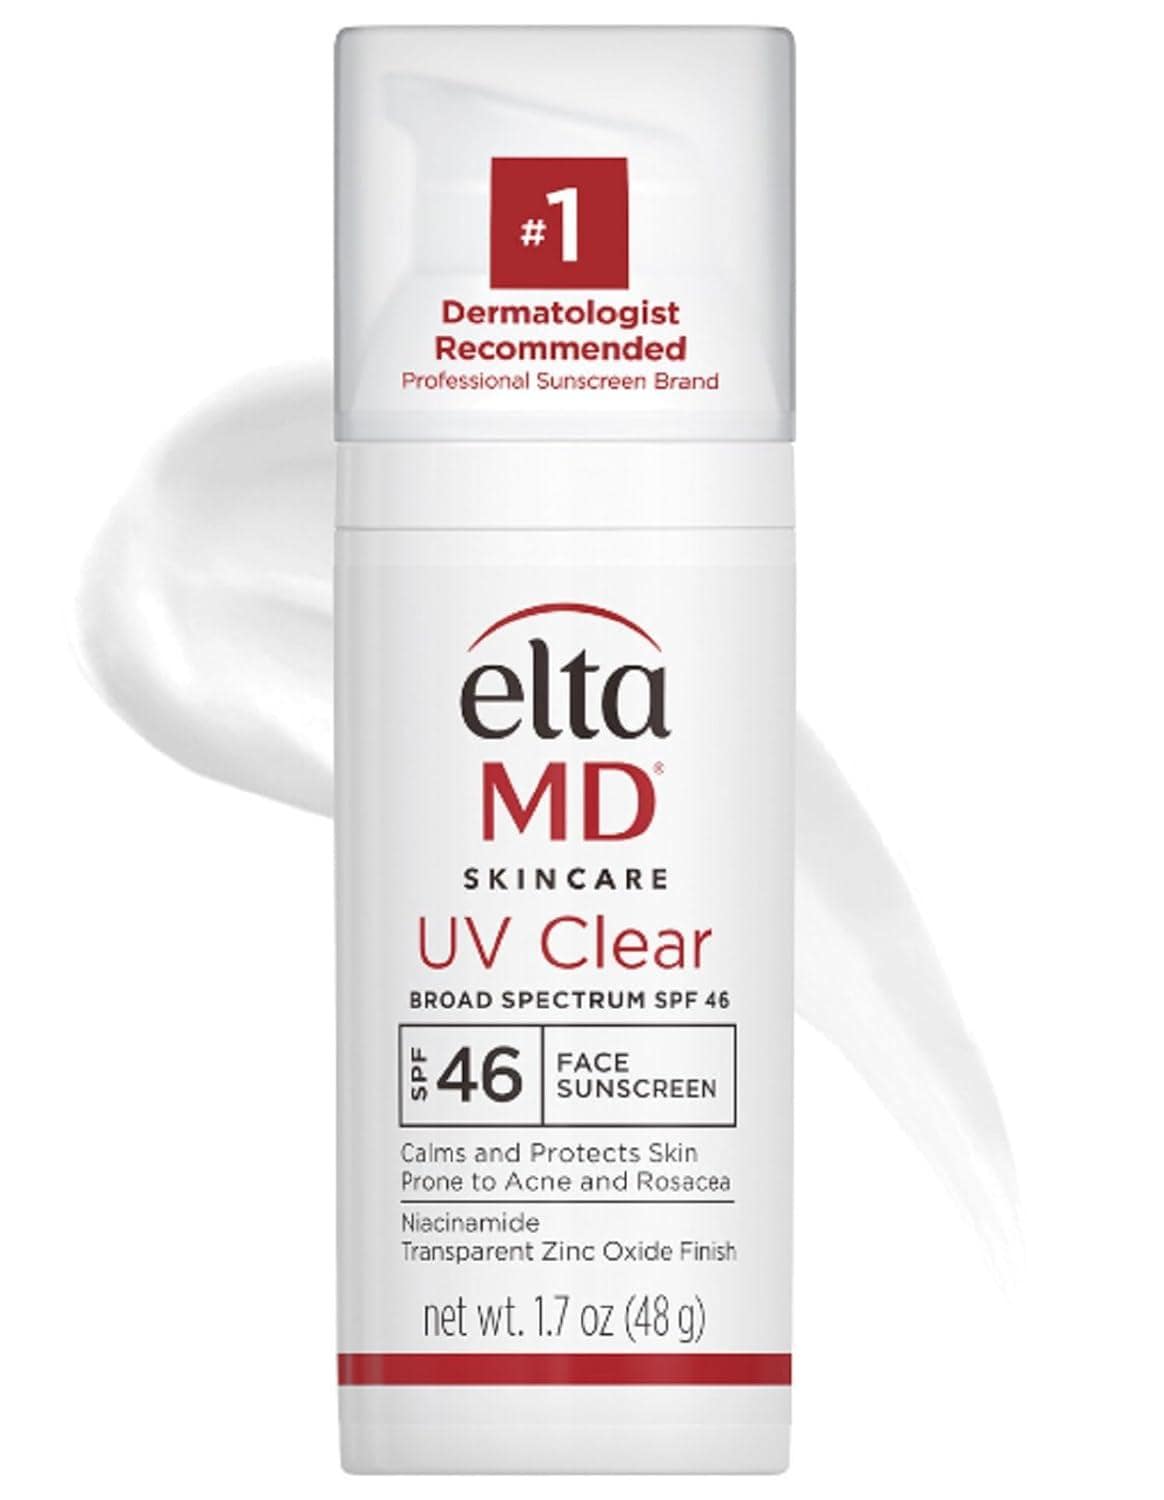 Elta MD UV Clear is my holy grail! Dr. Kung praises its noncomedogenic, oil-free formula. Niacinamide, a skin-loving antioxidant, makes it perfect Sunscreen for oily skin.